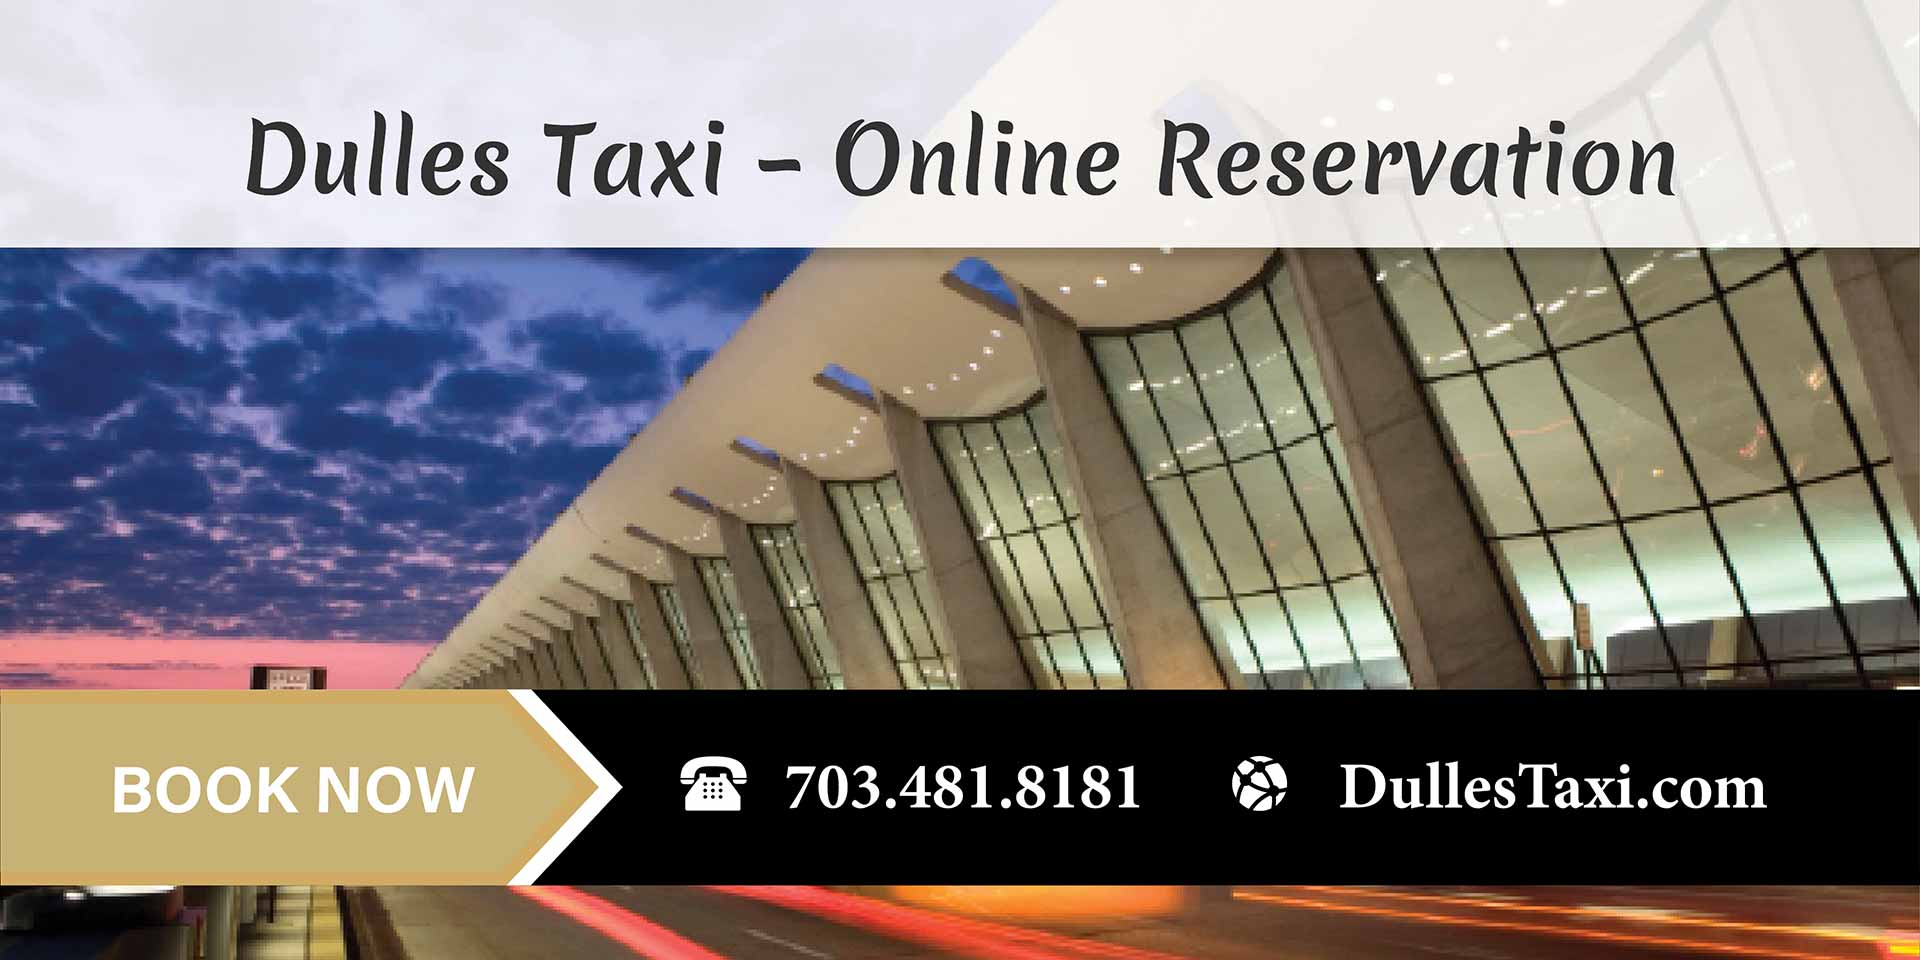 Dulles Taxi - Online Reservation